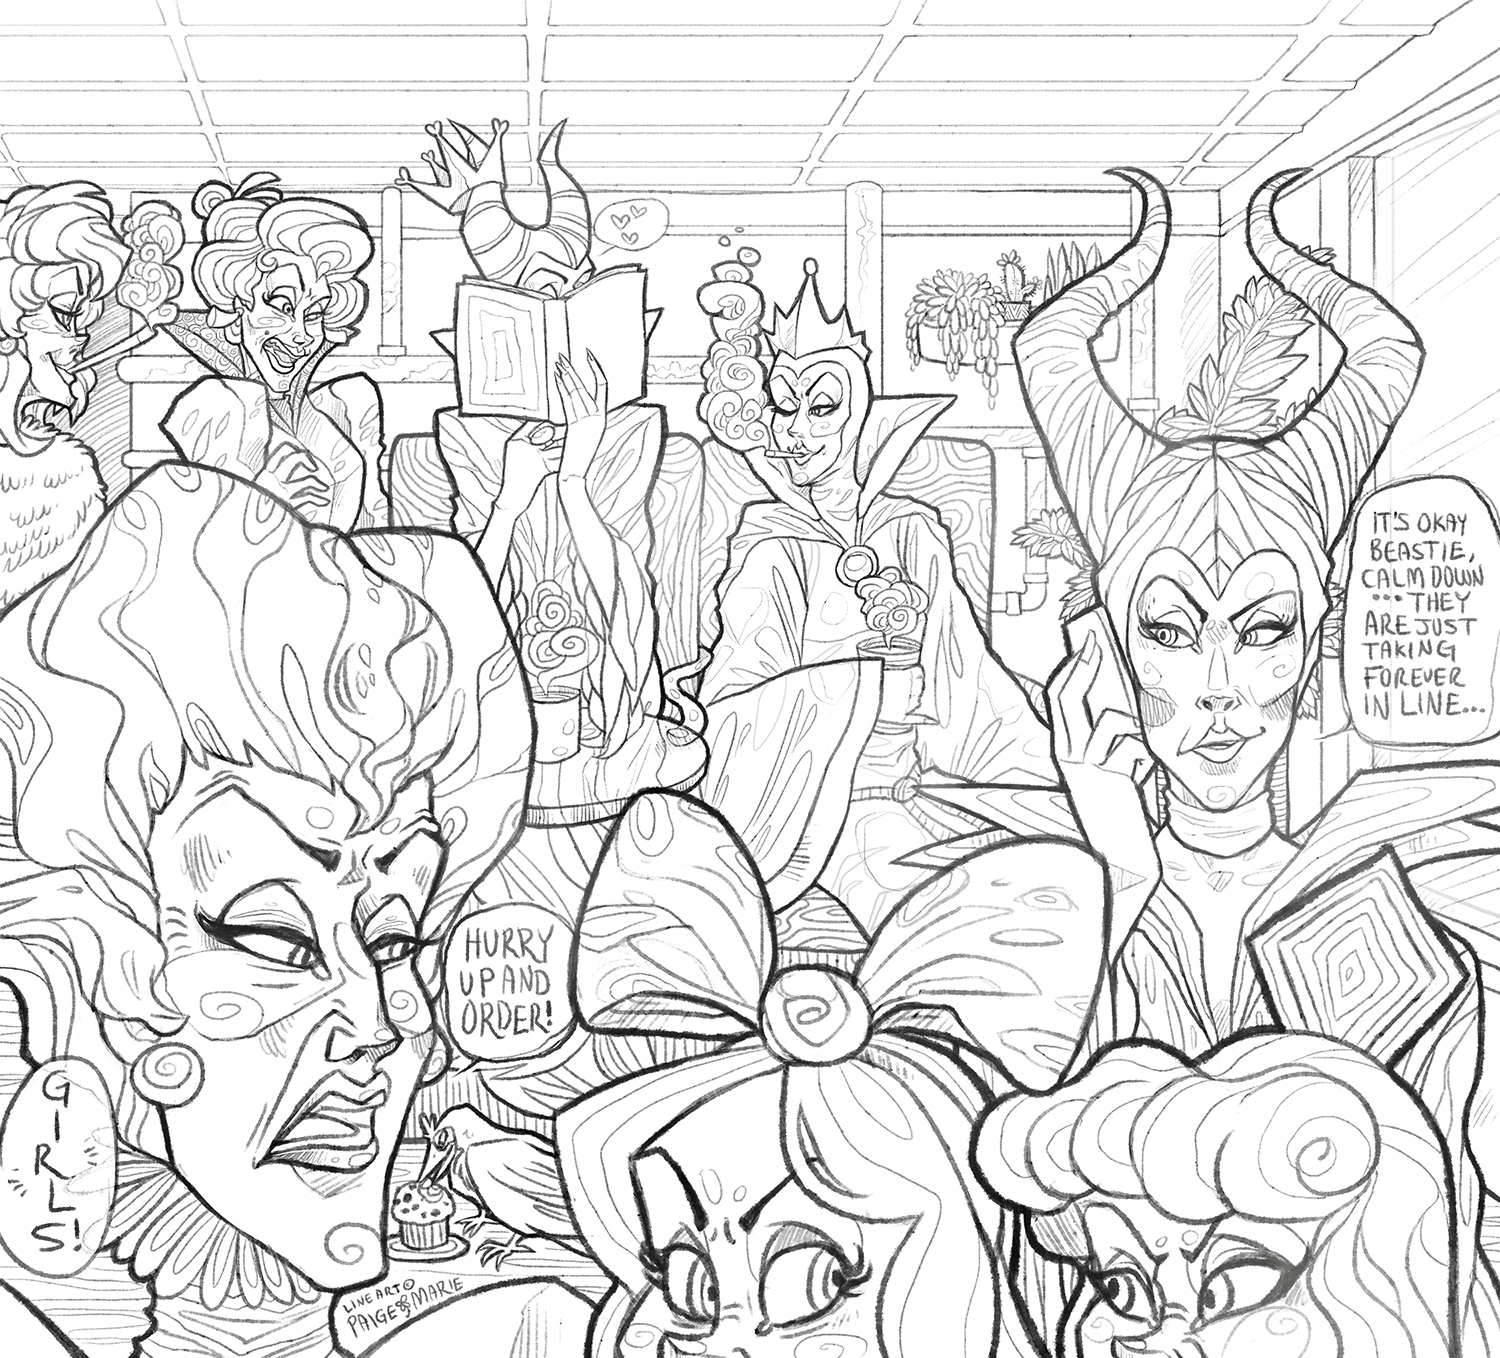 Coloring page disney villain cafe by witchin on